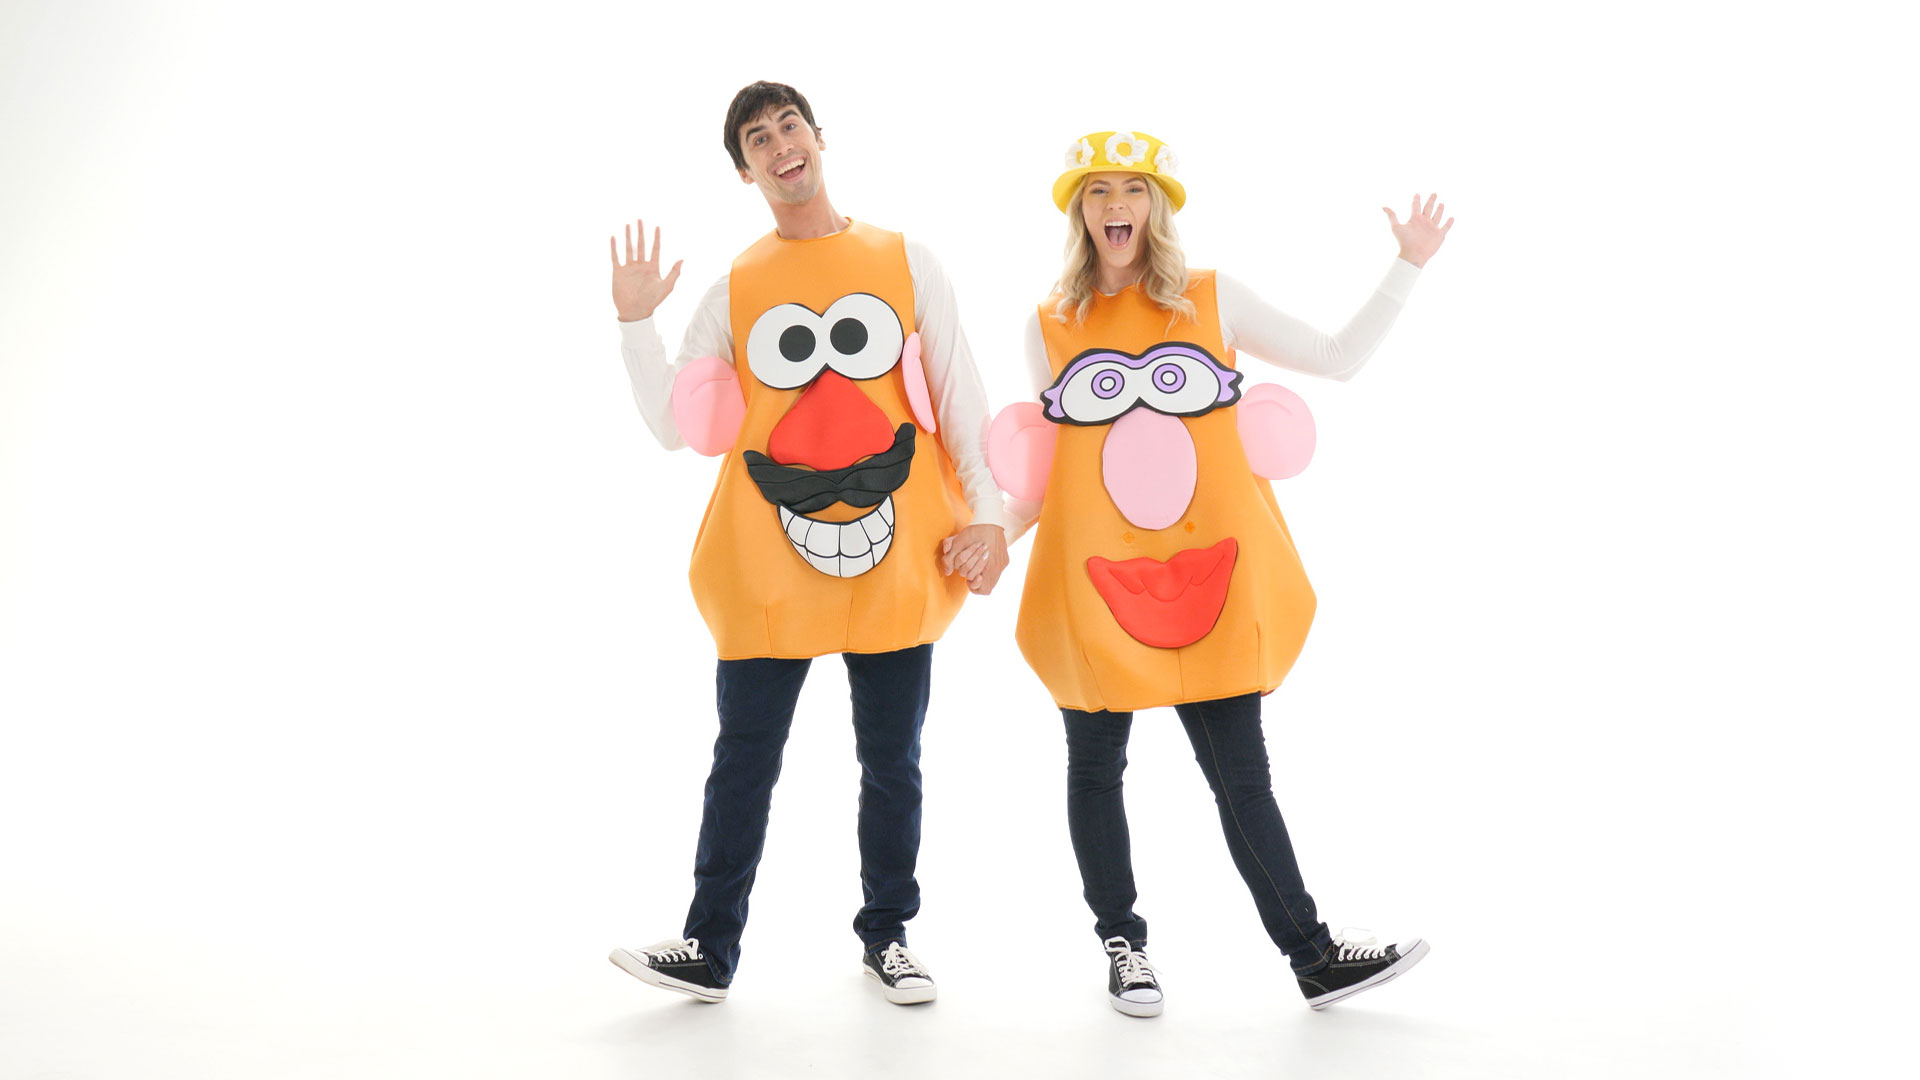 This Mr / Mrs Potato Head Plus Size Costume gives you the chance to be your favorite childhood toy, or a dinner. It's your choice.  Available in 2X.